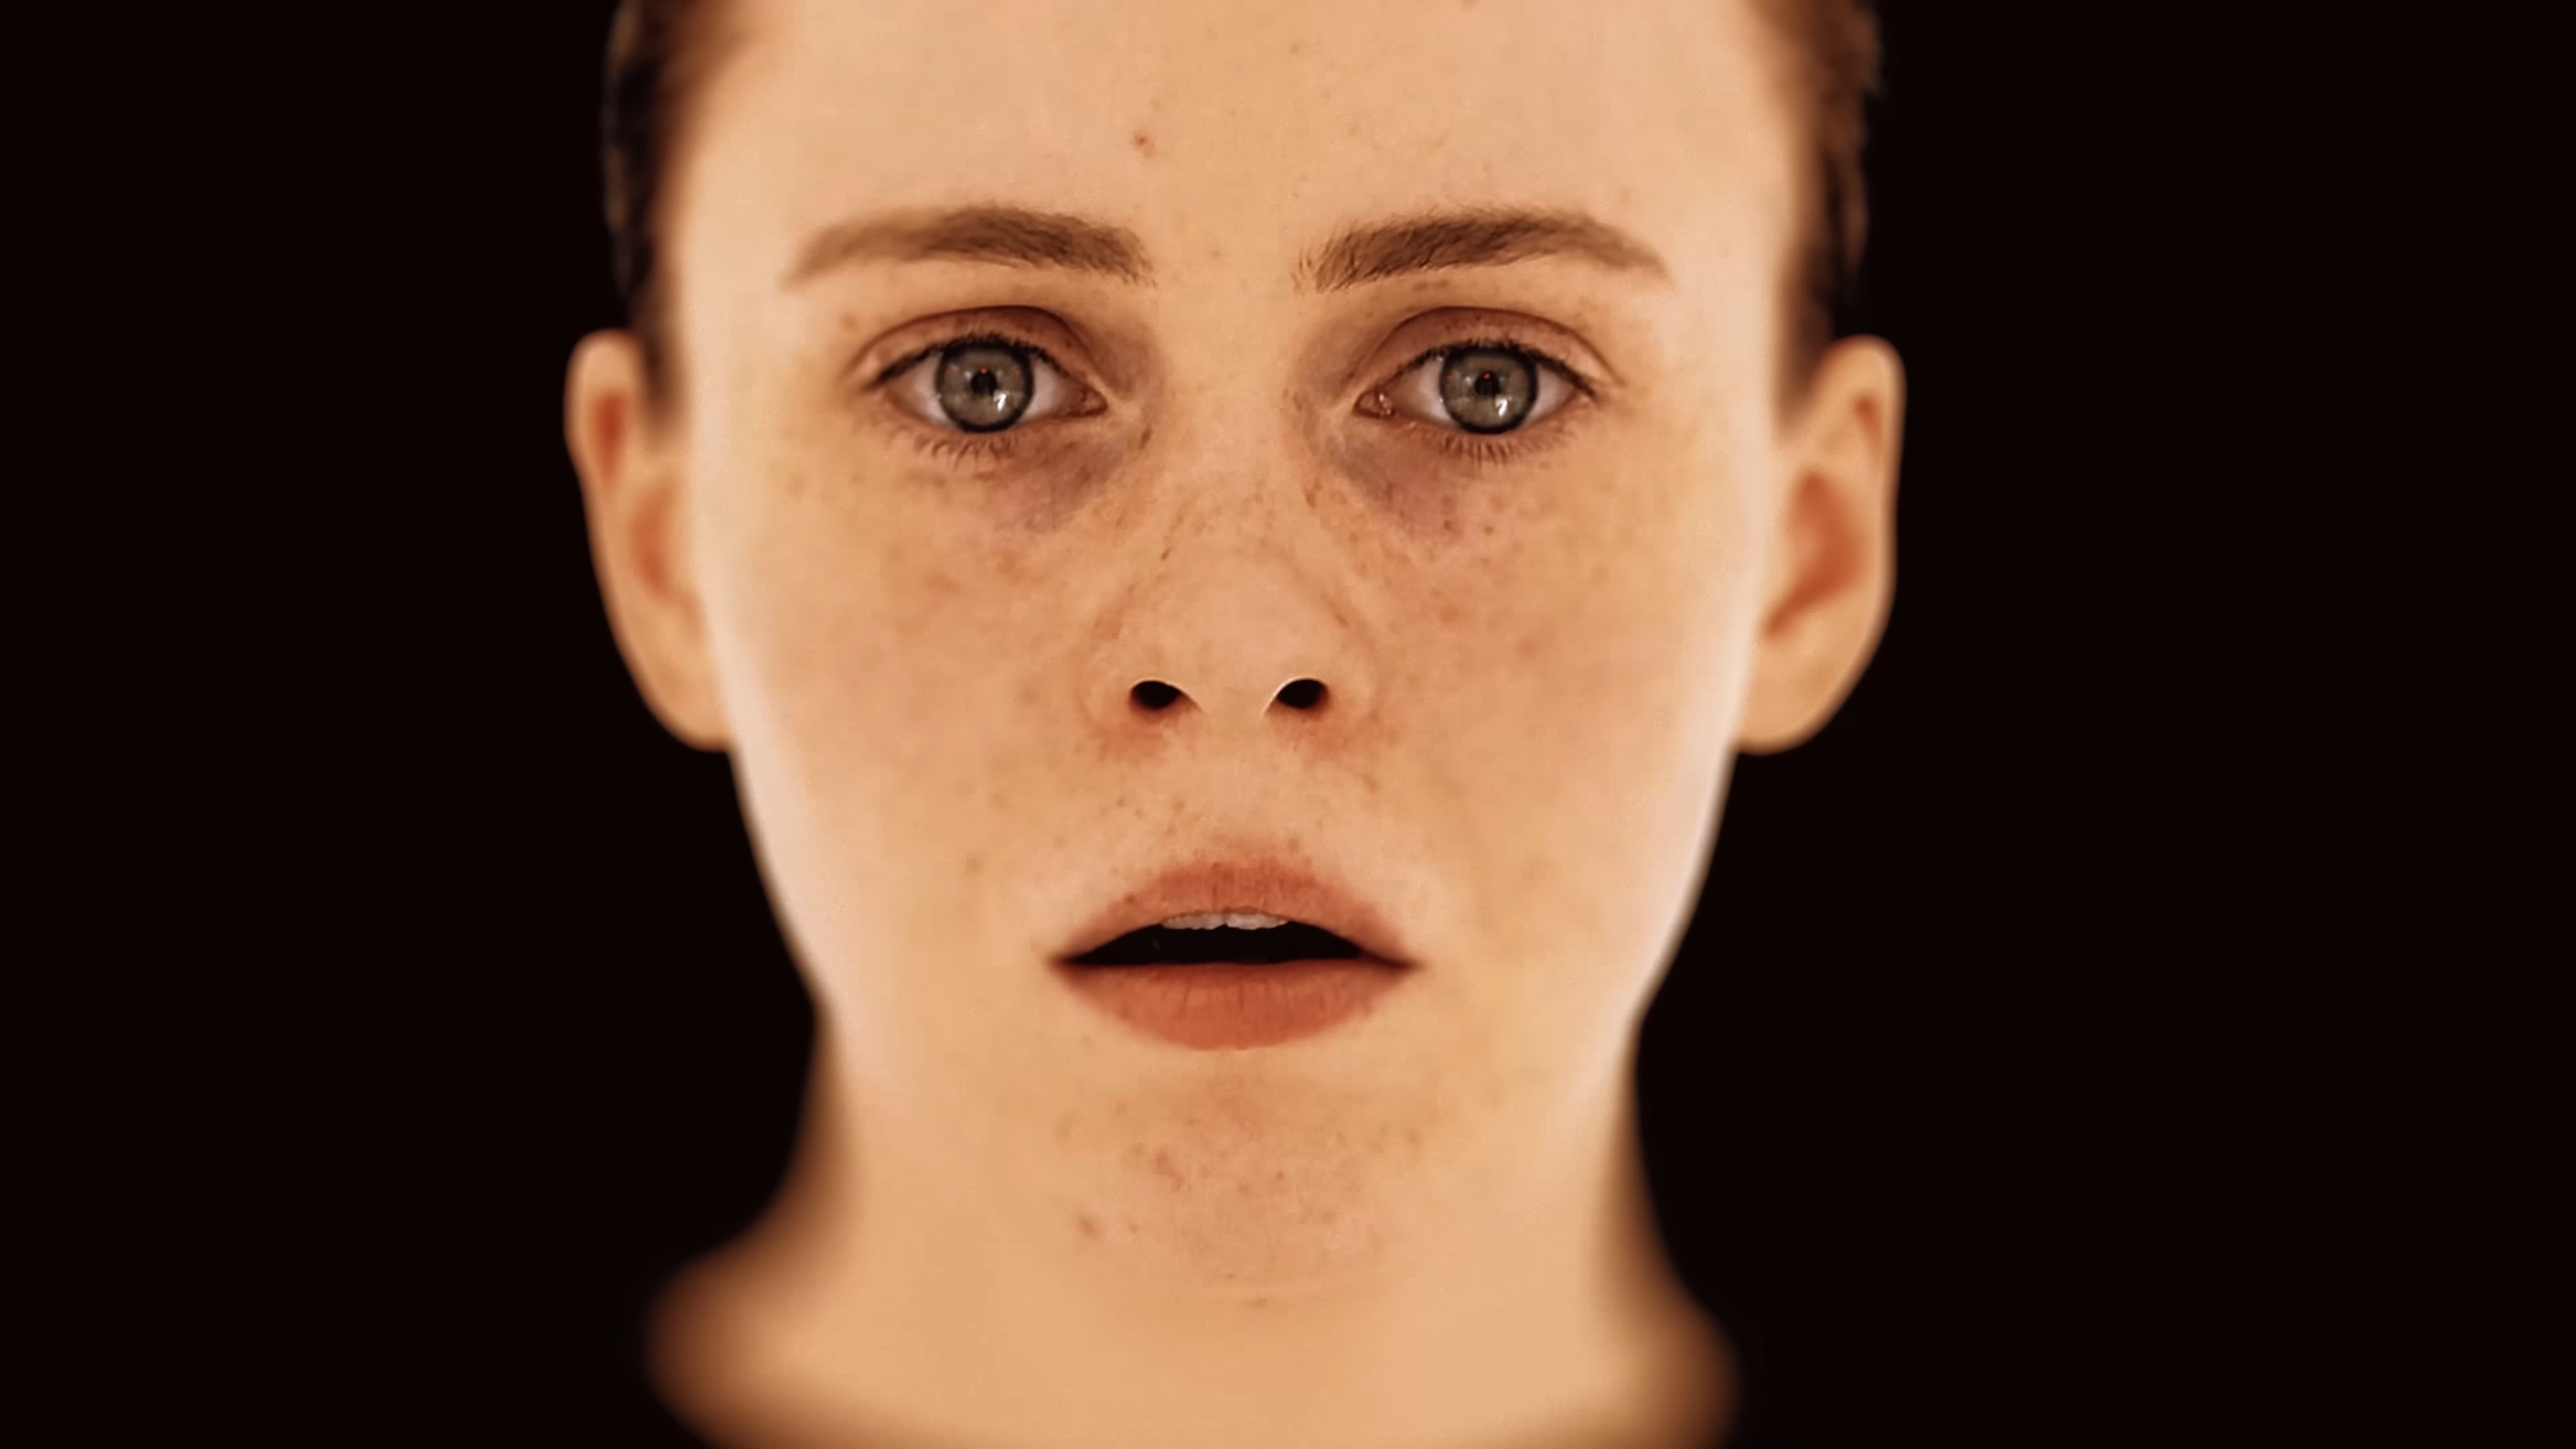 A close-up, brightly lit shot of actor Sophia Lillis looking scared, with the reflection of a room and door in her eyes, from the OD trailer